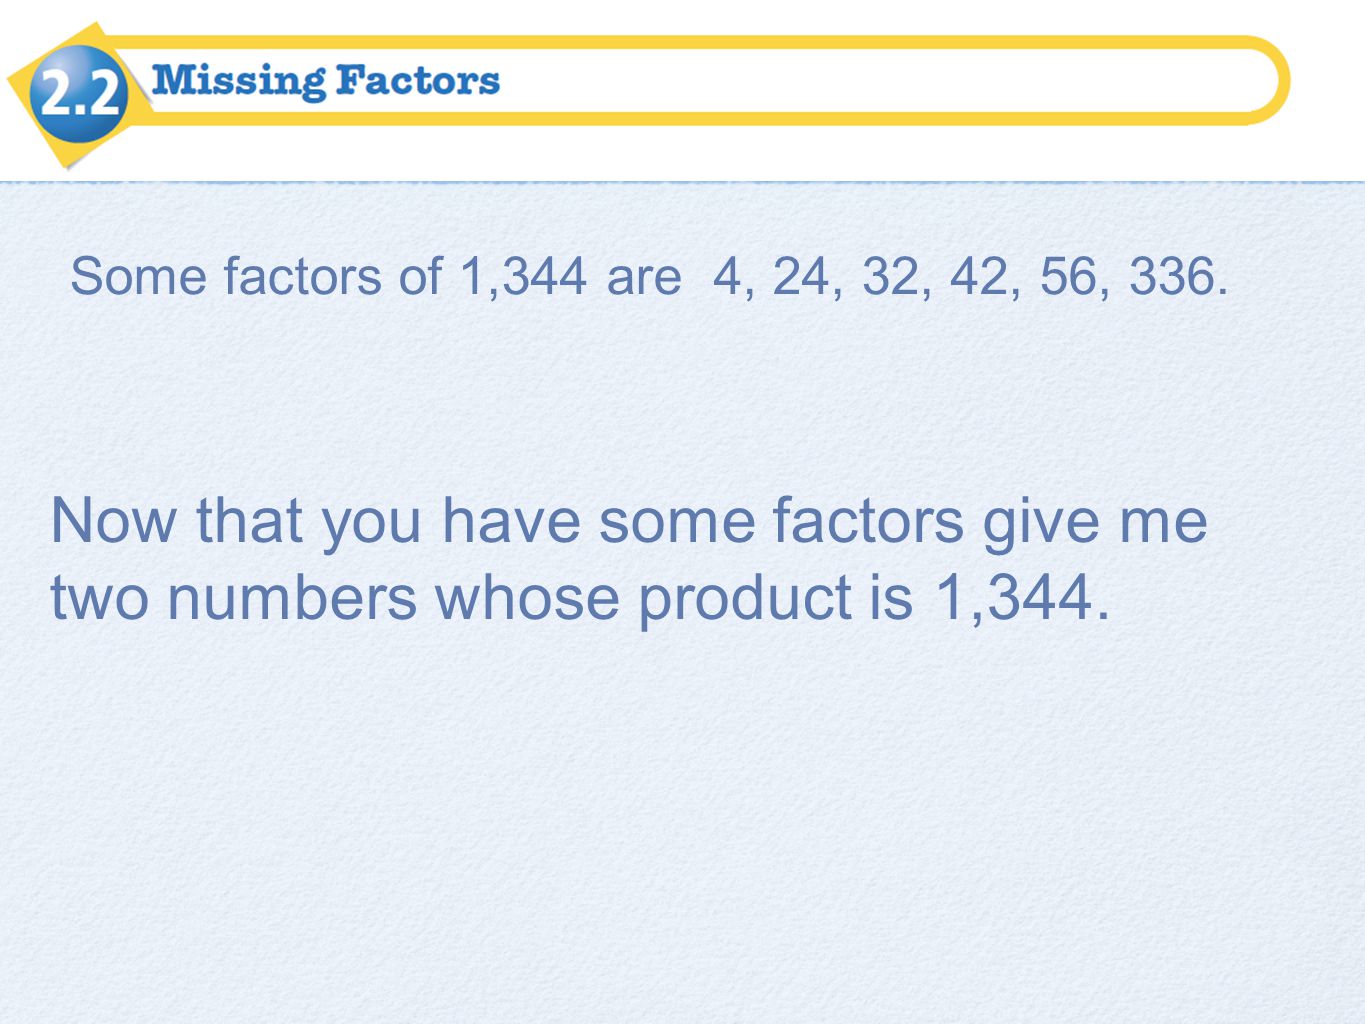 Some factors of 1,344 are 4, 24, 32, 42, 56, 336.